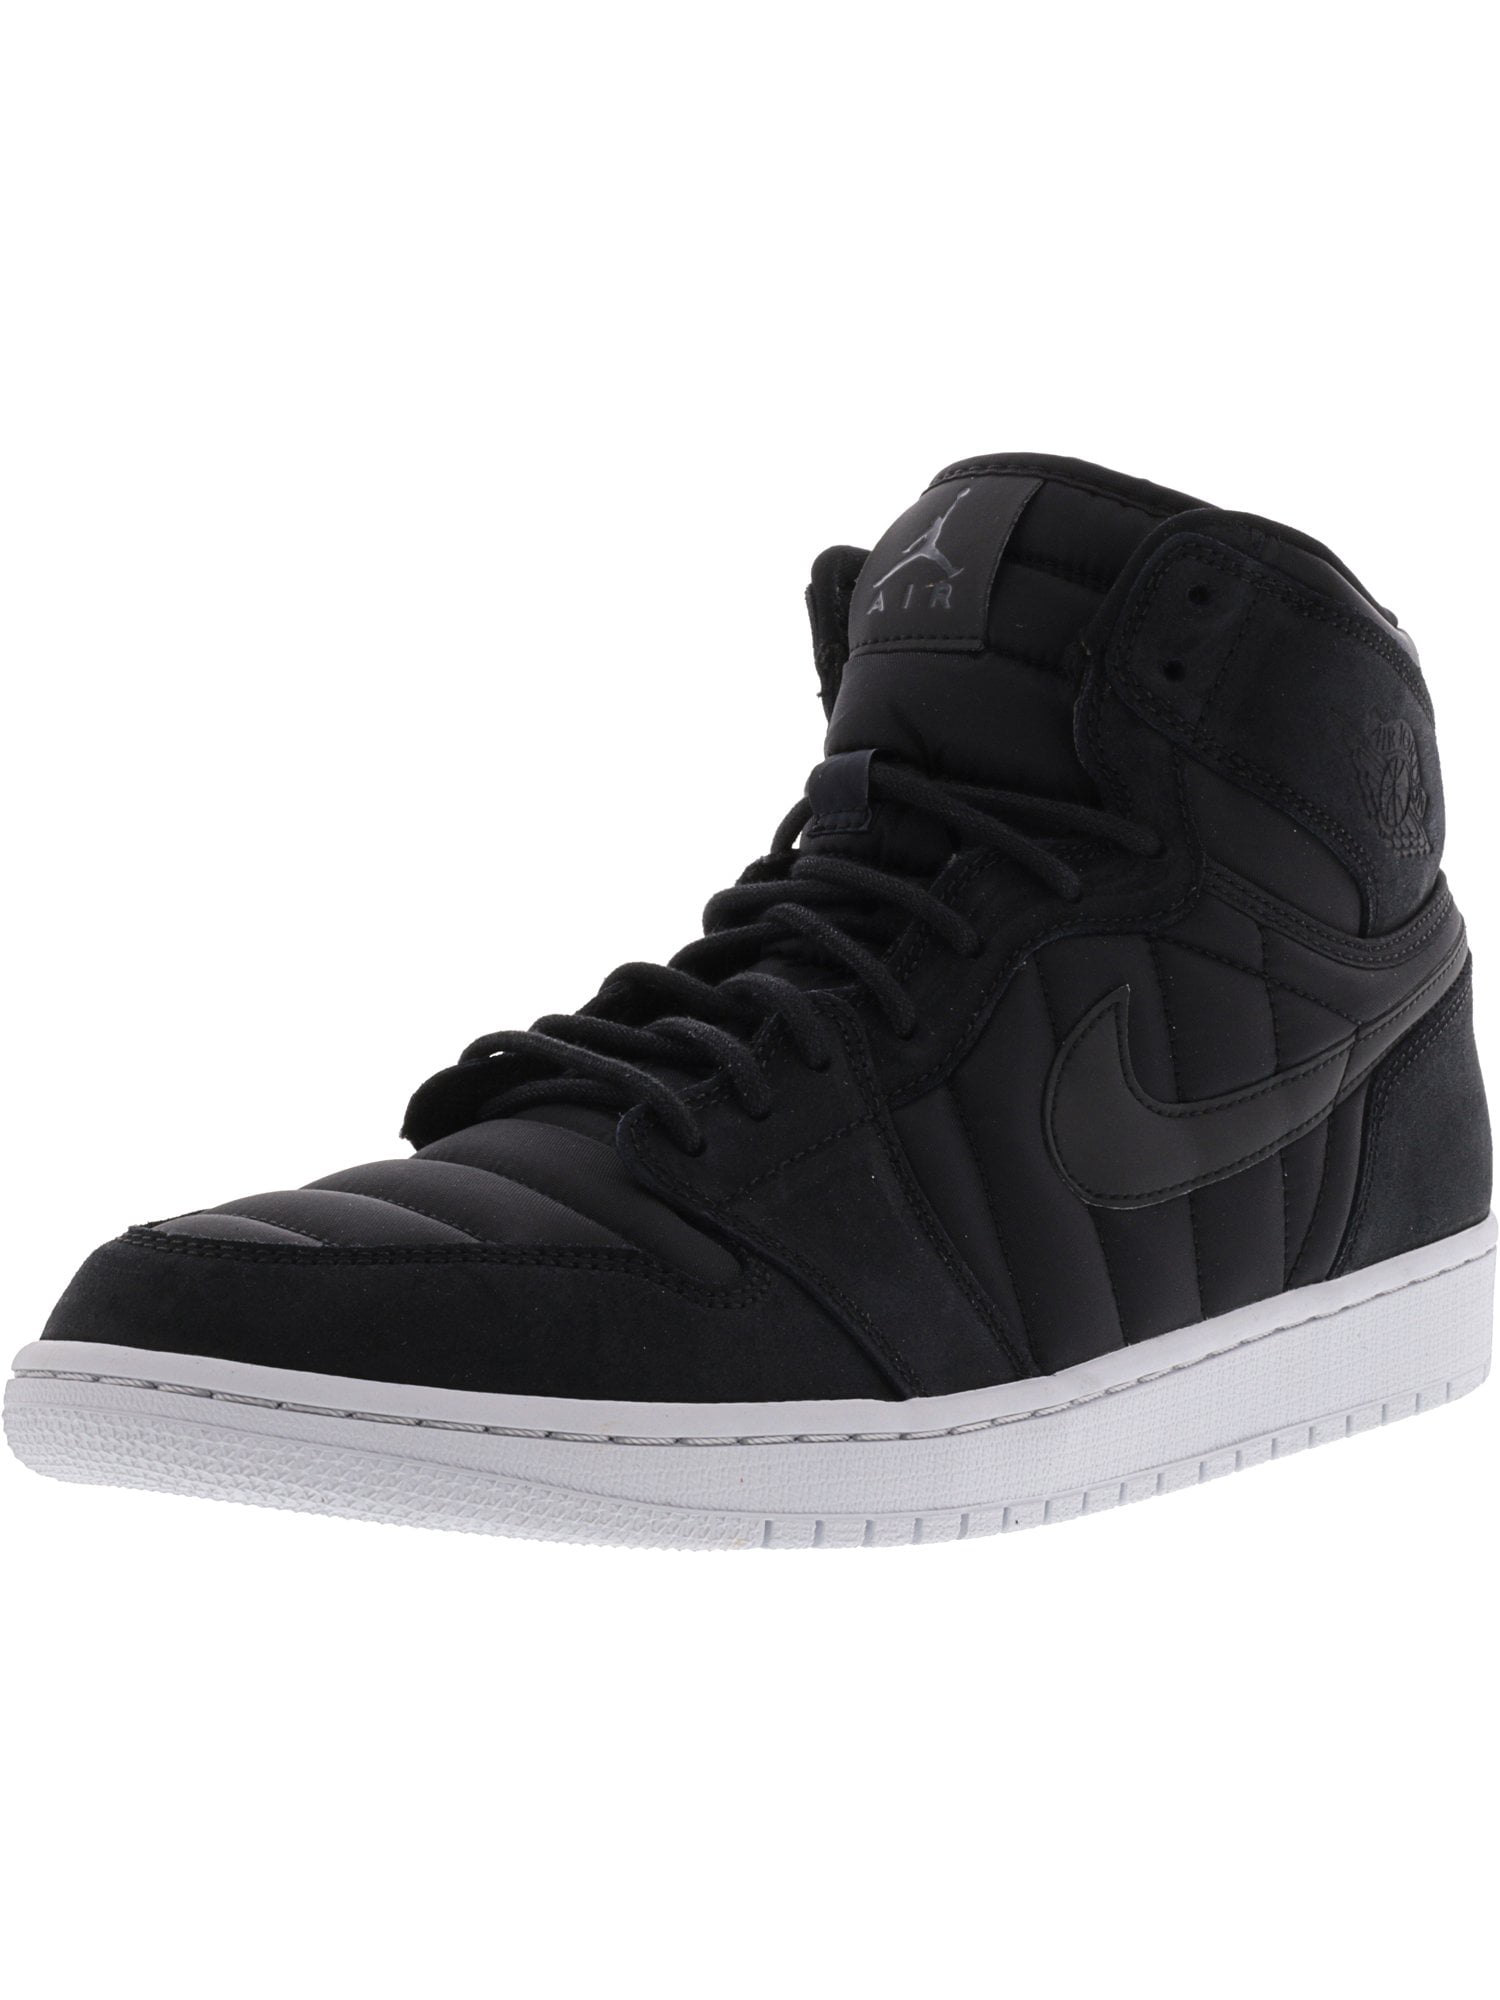 nike high top with strap